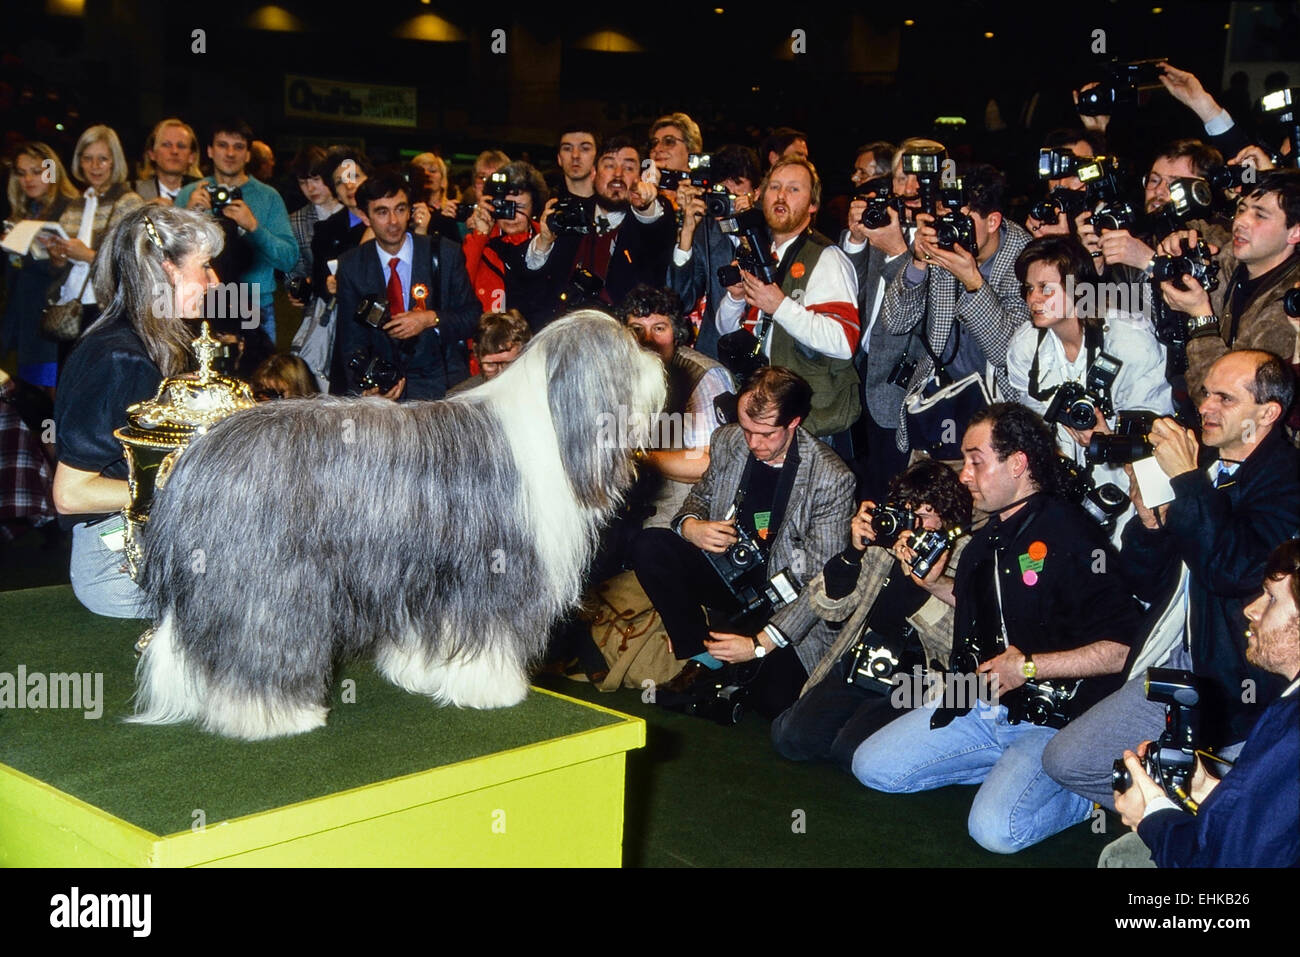 Crufts 1989 Best in show winner. Potterdale Classic of Moonhill. Bearded Collie. Owned by Brenda White. Earls Court. London Stock Photo